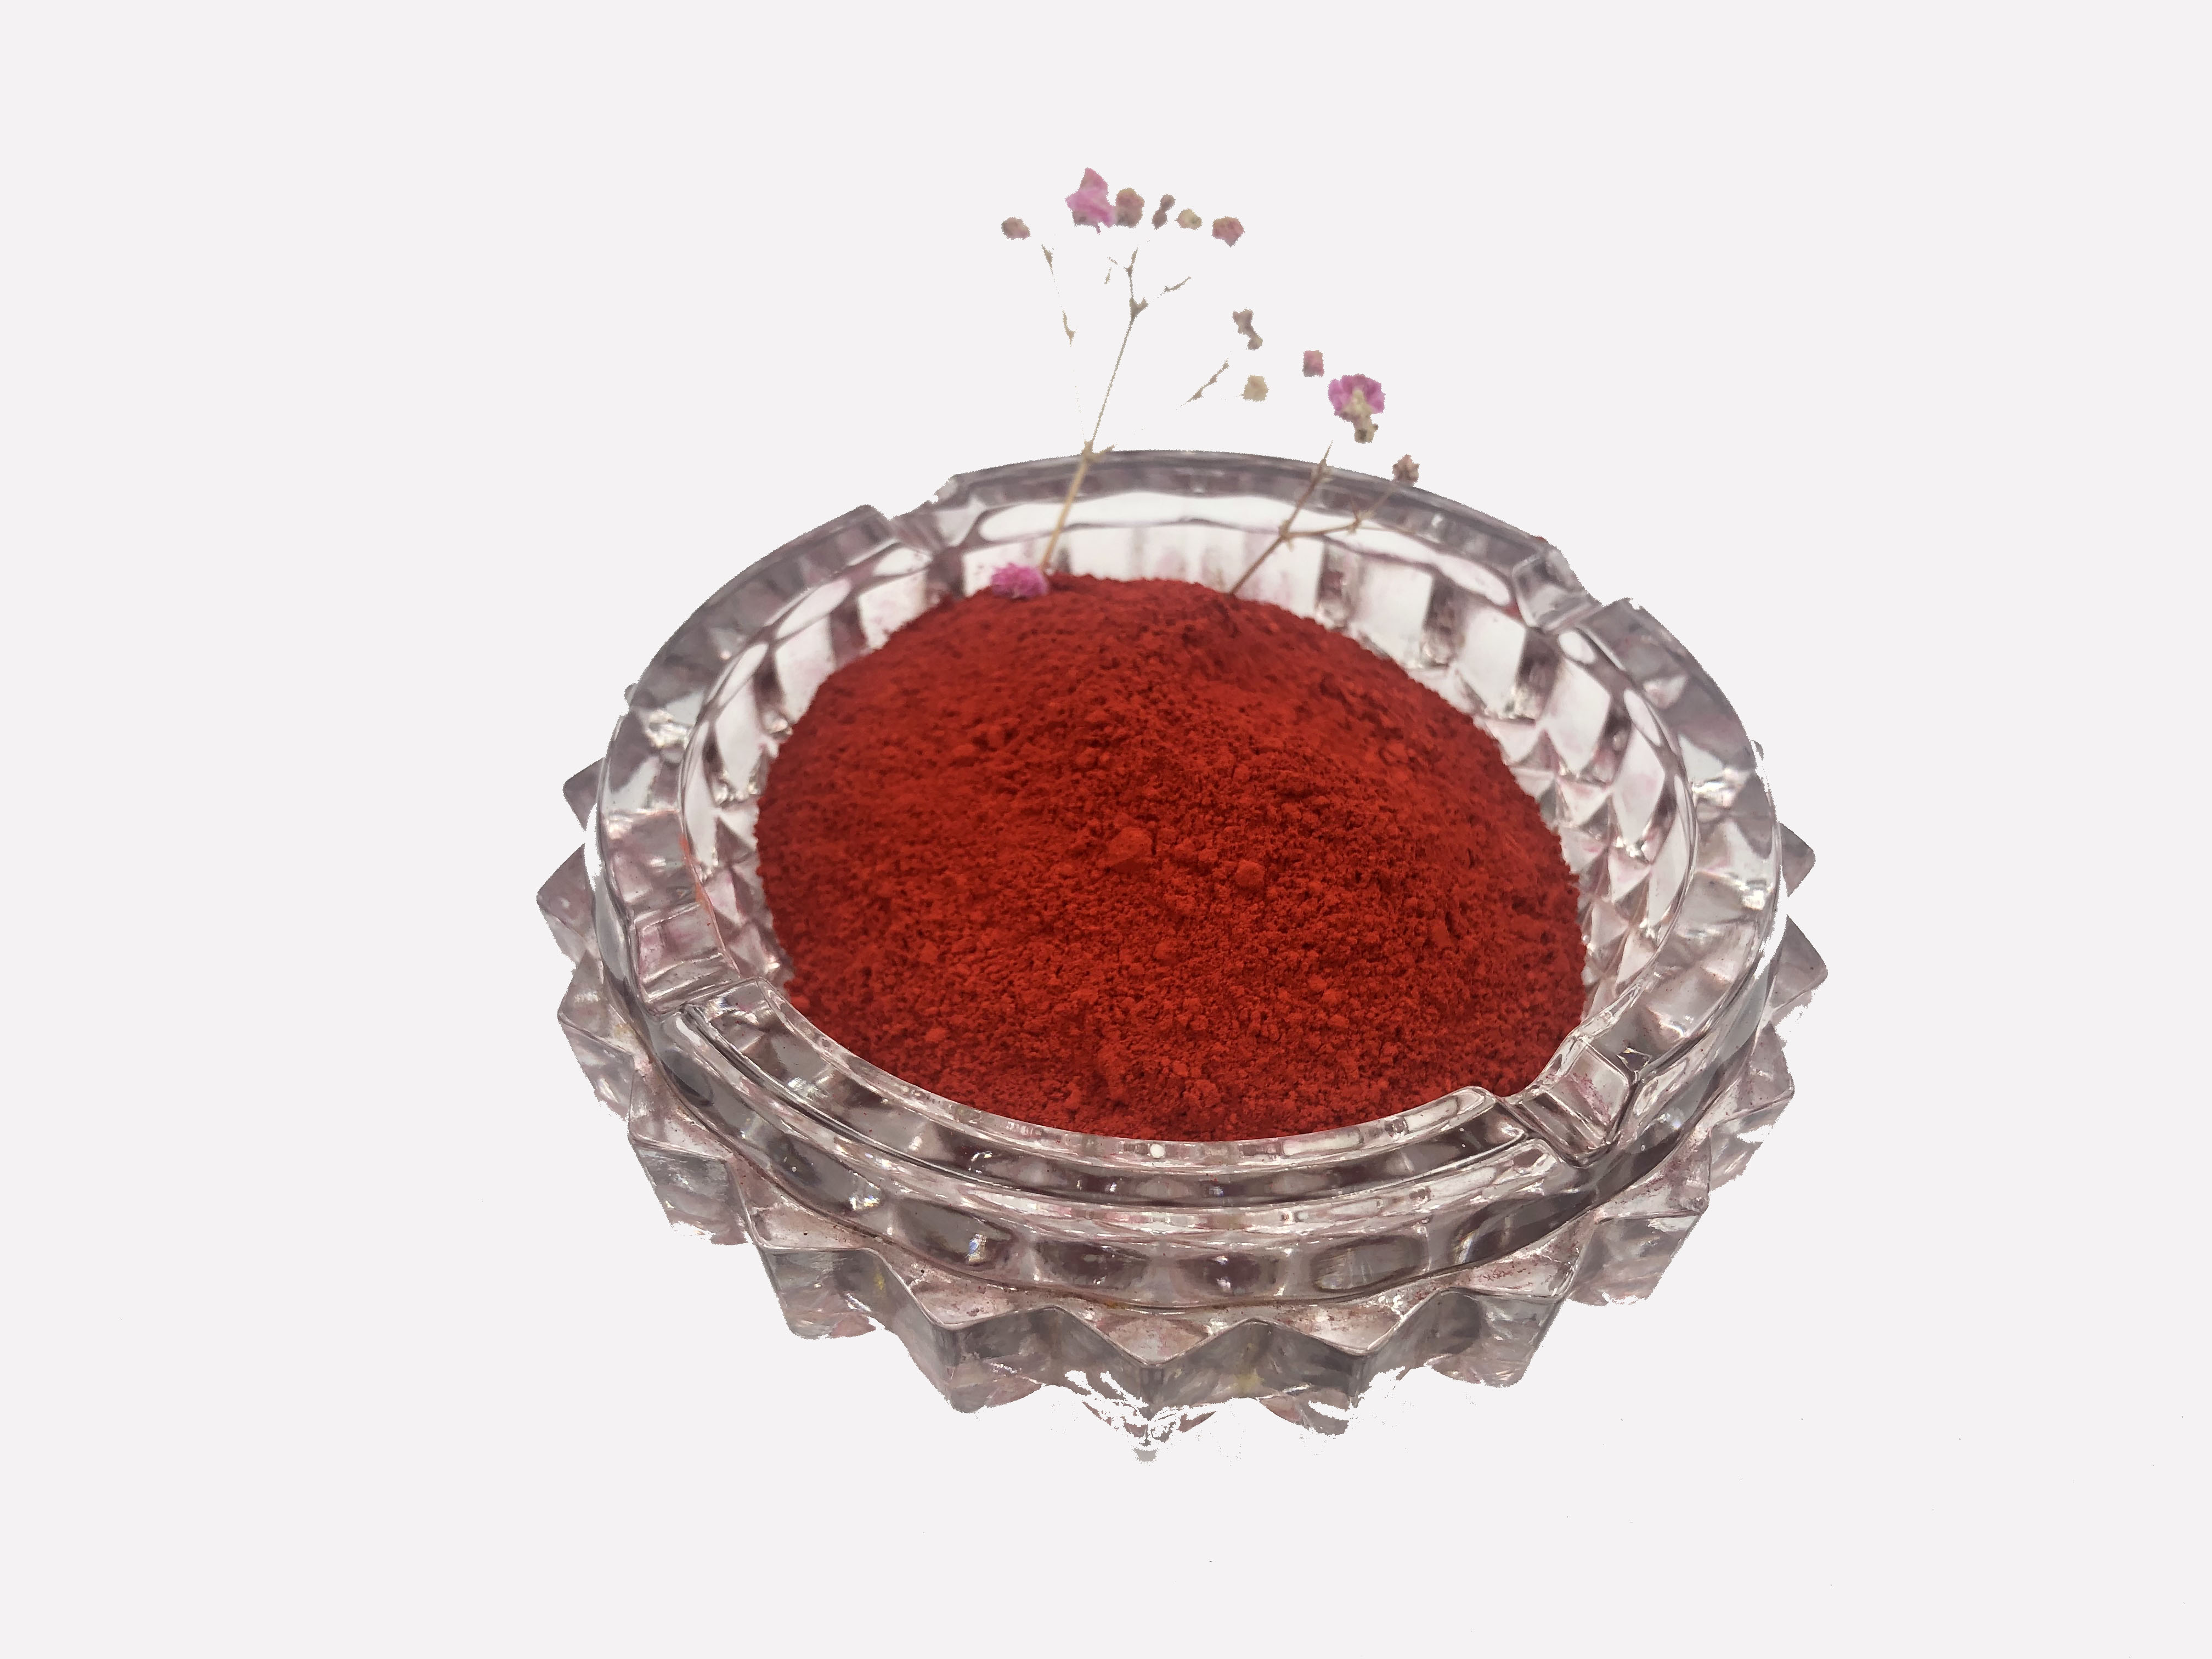 Pigment Red 166 Used In PP Non Volatile Insoluble In Water Great Heat Resistance 